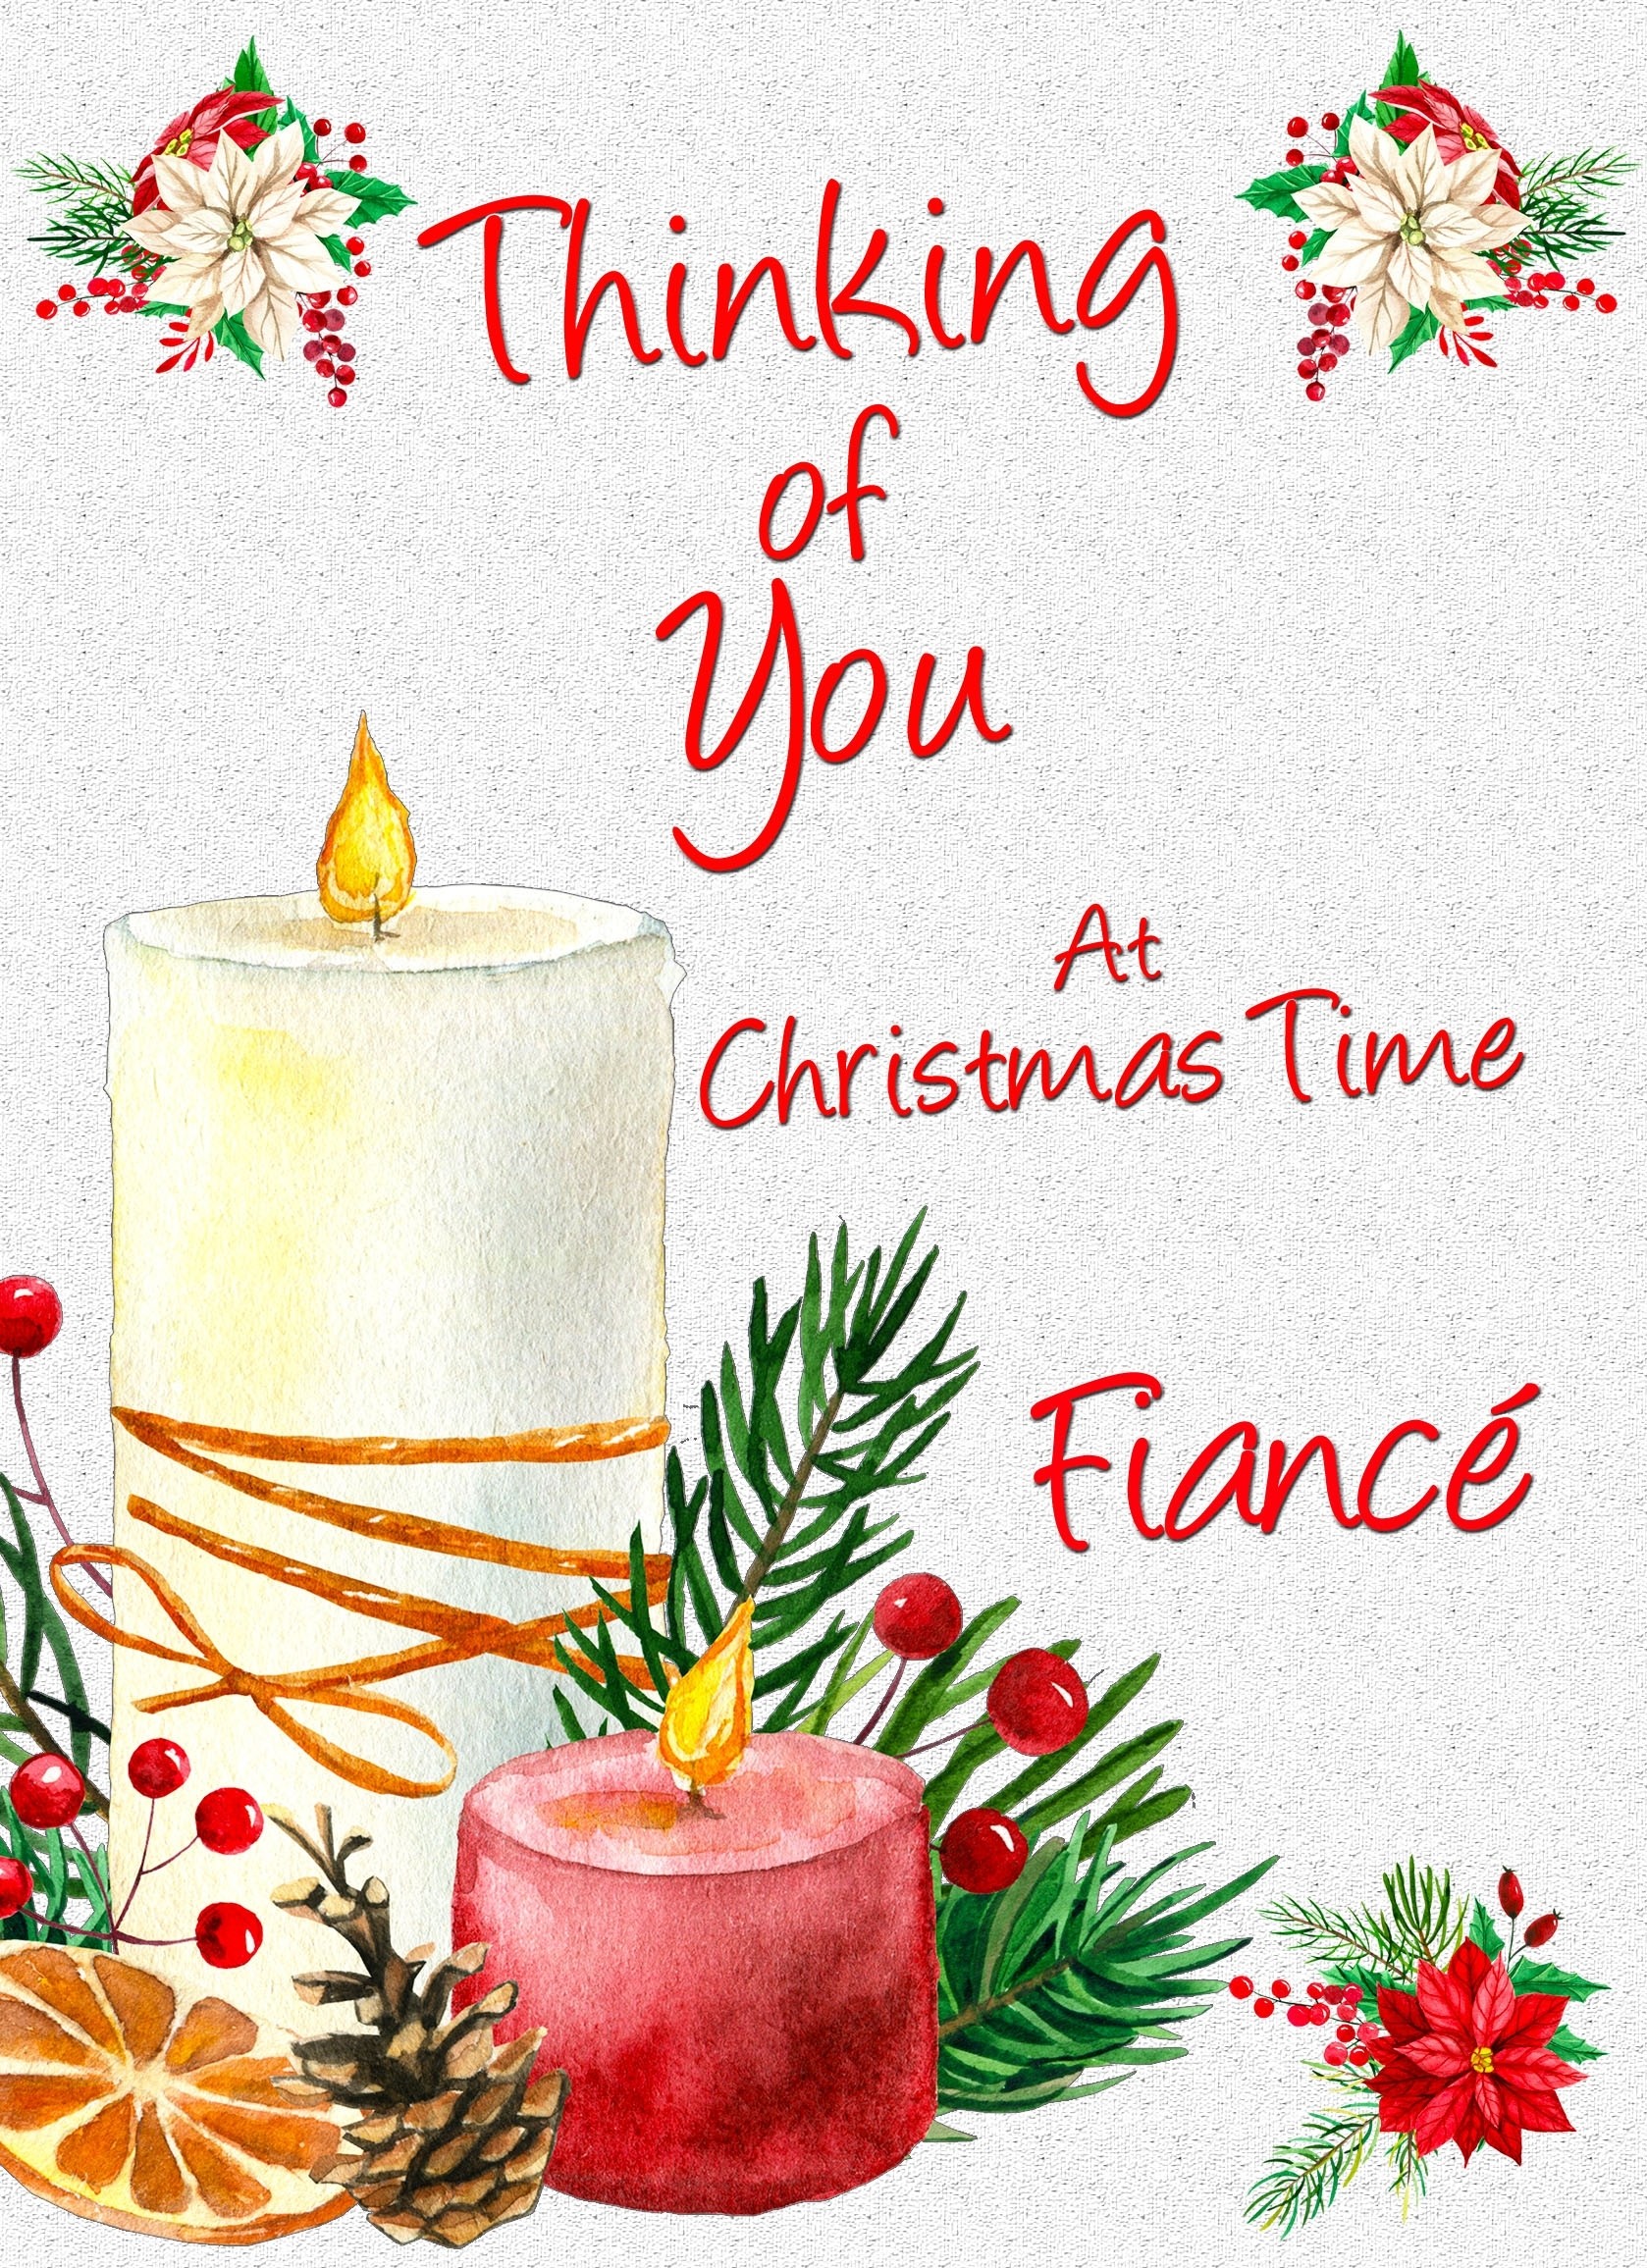 Thinking of You at Christmas Card For Fiance (Candle)